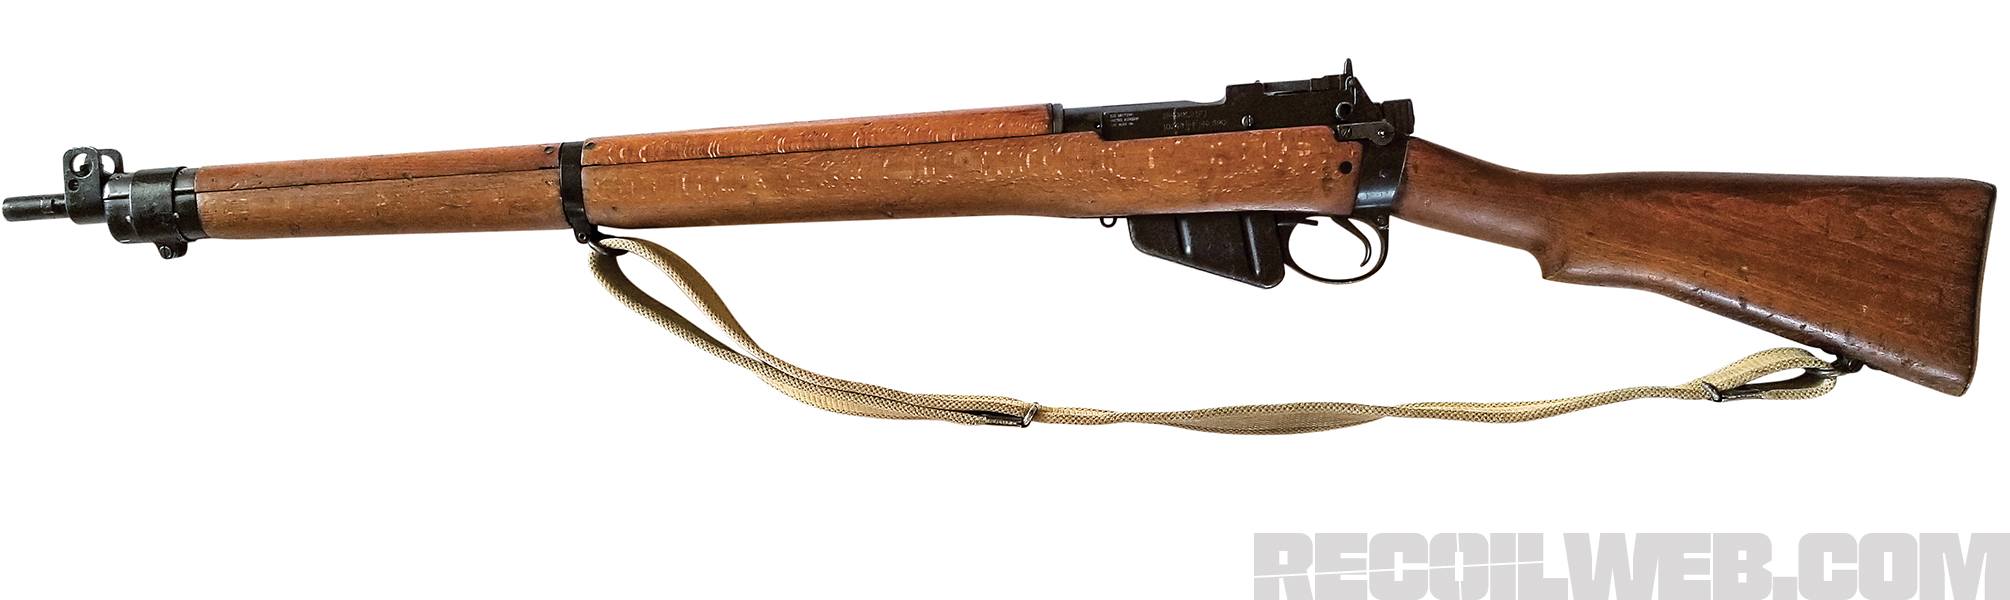 A GUIDE TO THE LEE ENFIELD .303 RIFLE No. 4 MK. 1, MK. 1*, MK.